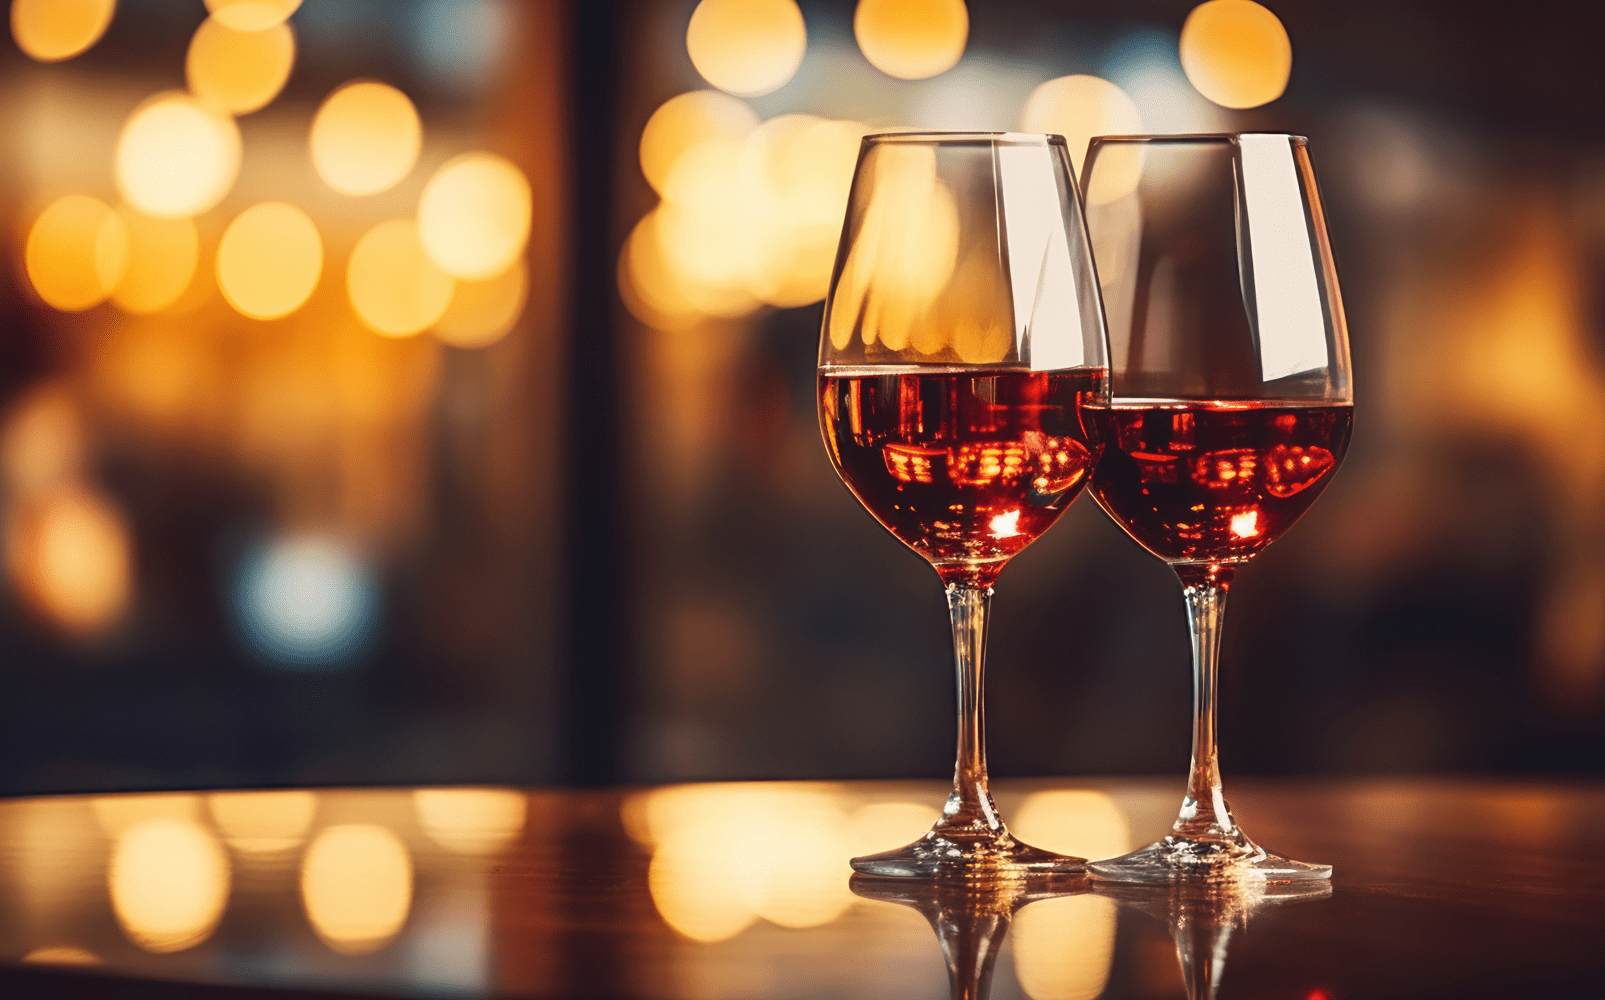 Two glasses of wine in a bar.